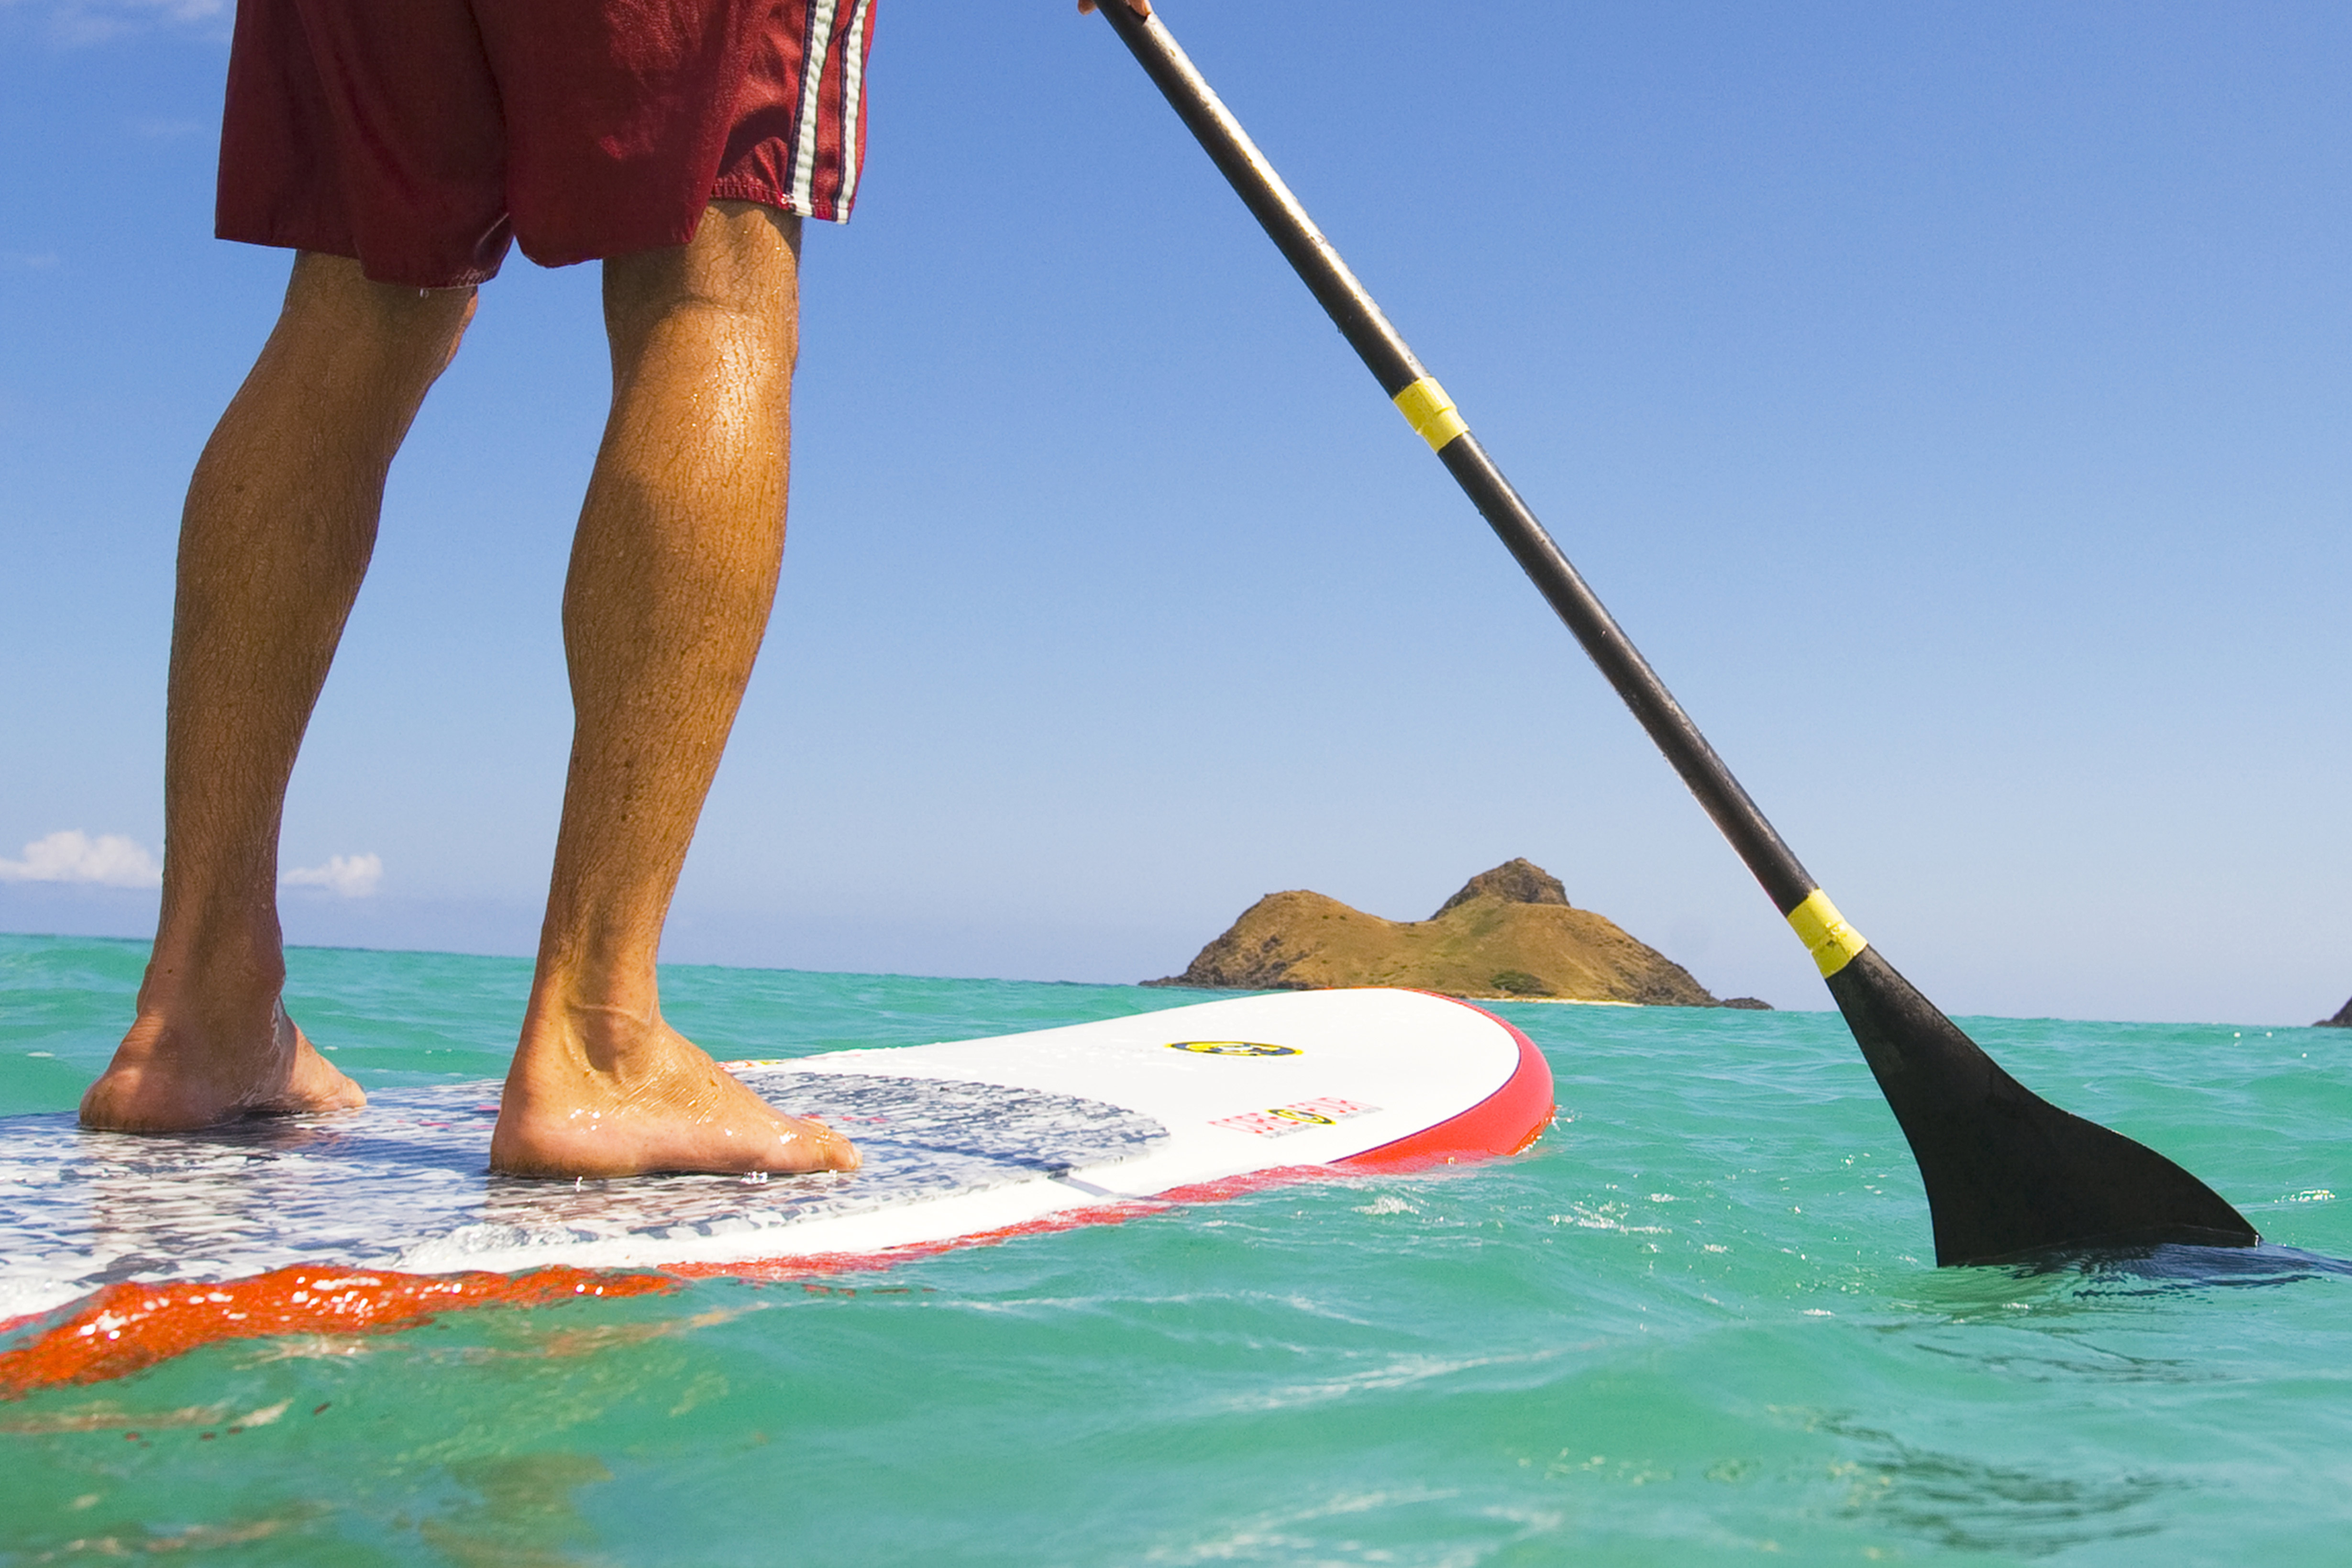 A stand-up paddleboarder off the coast of O'ahu. Image by Dana Edmunds / Getty